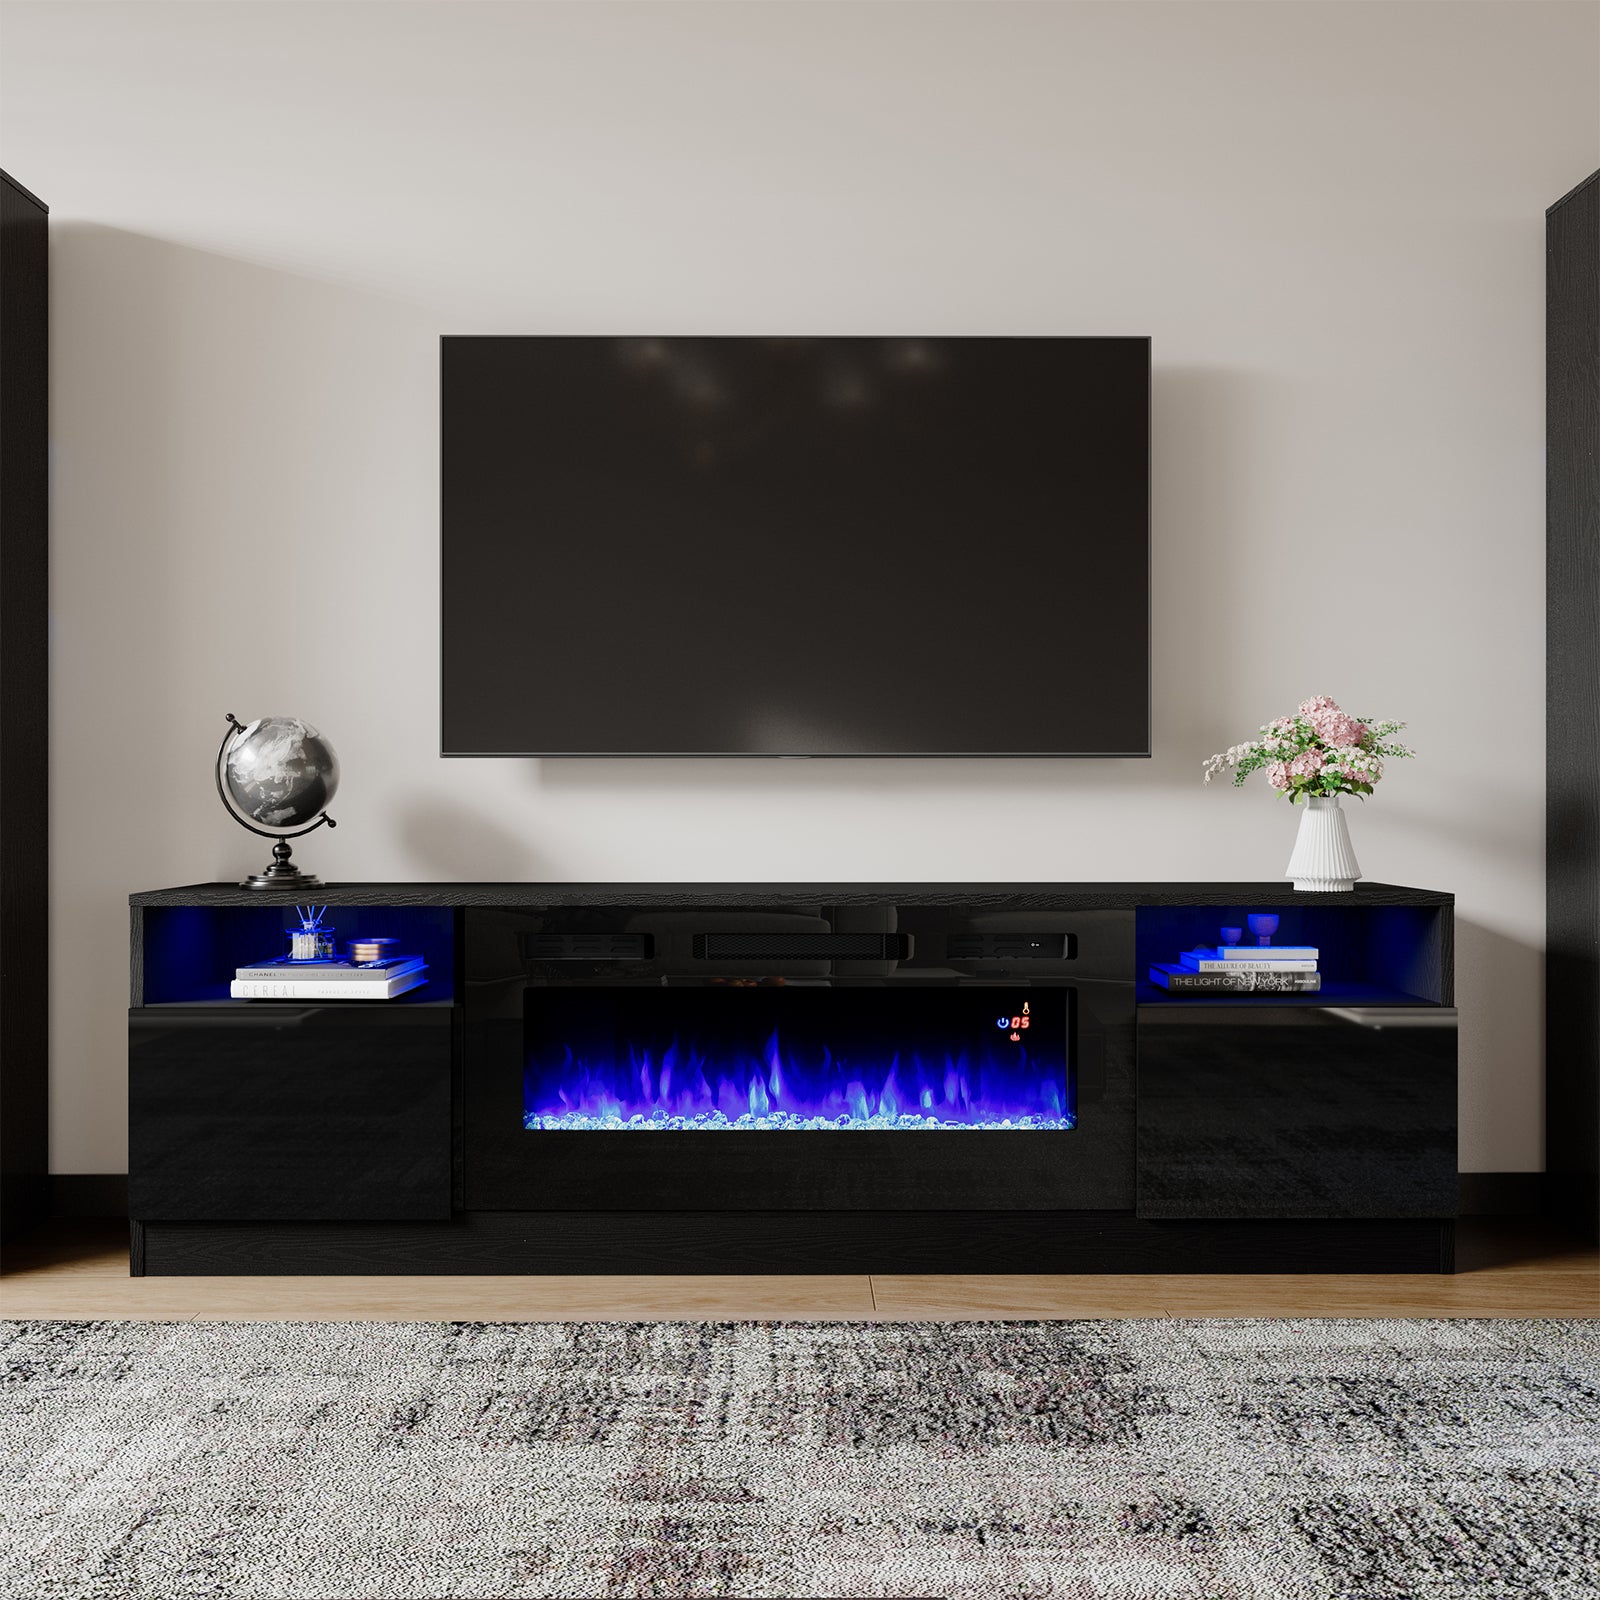 Amerlife Portal Fireplace TV Stand 80'' Modern Wood Texture